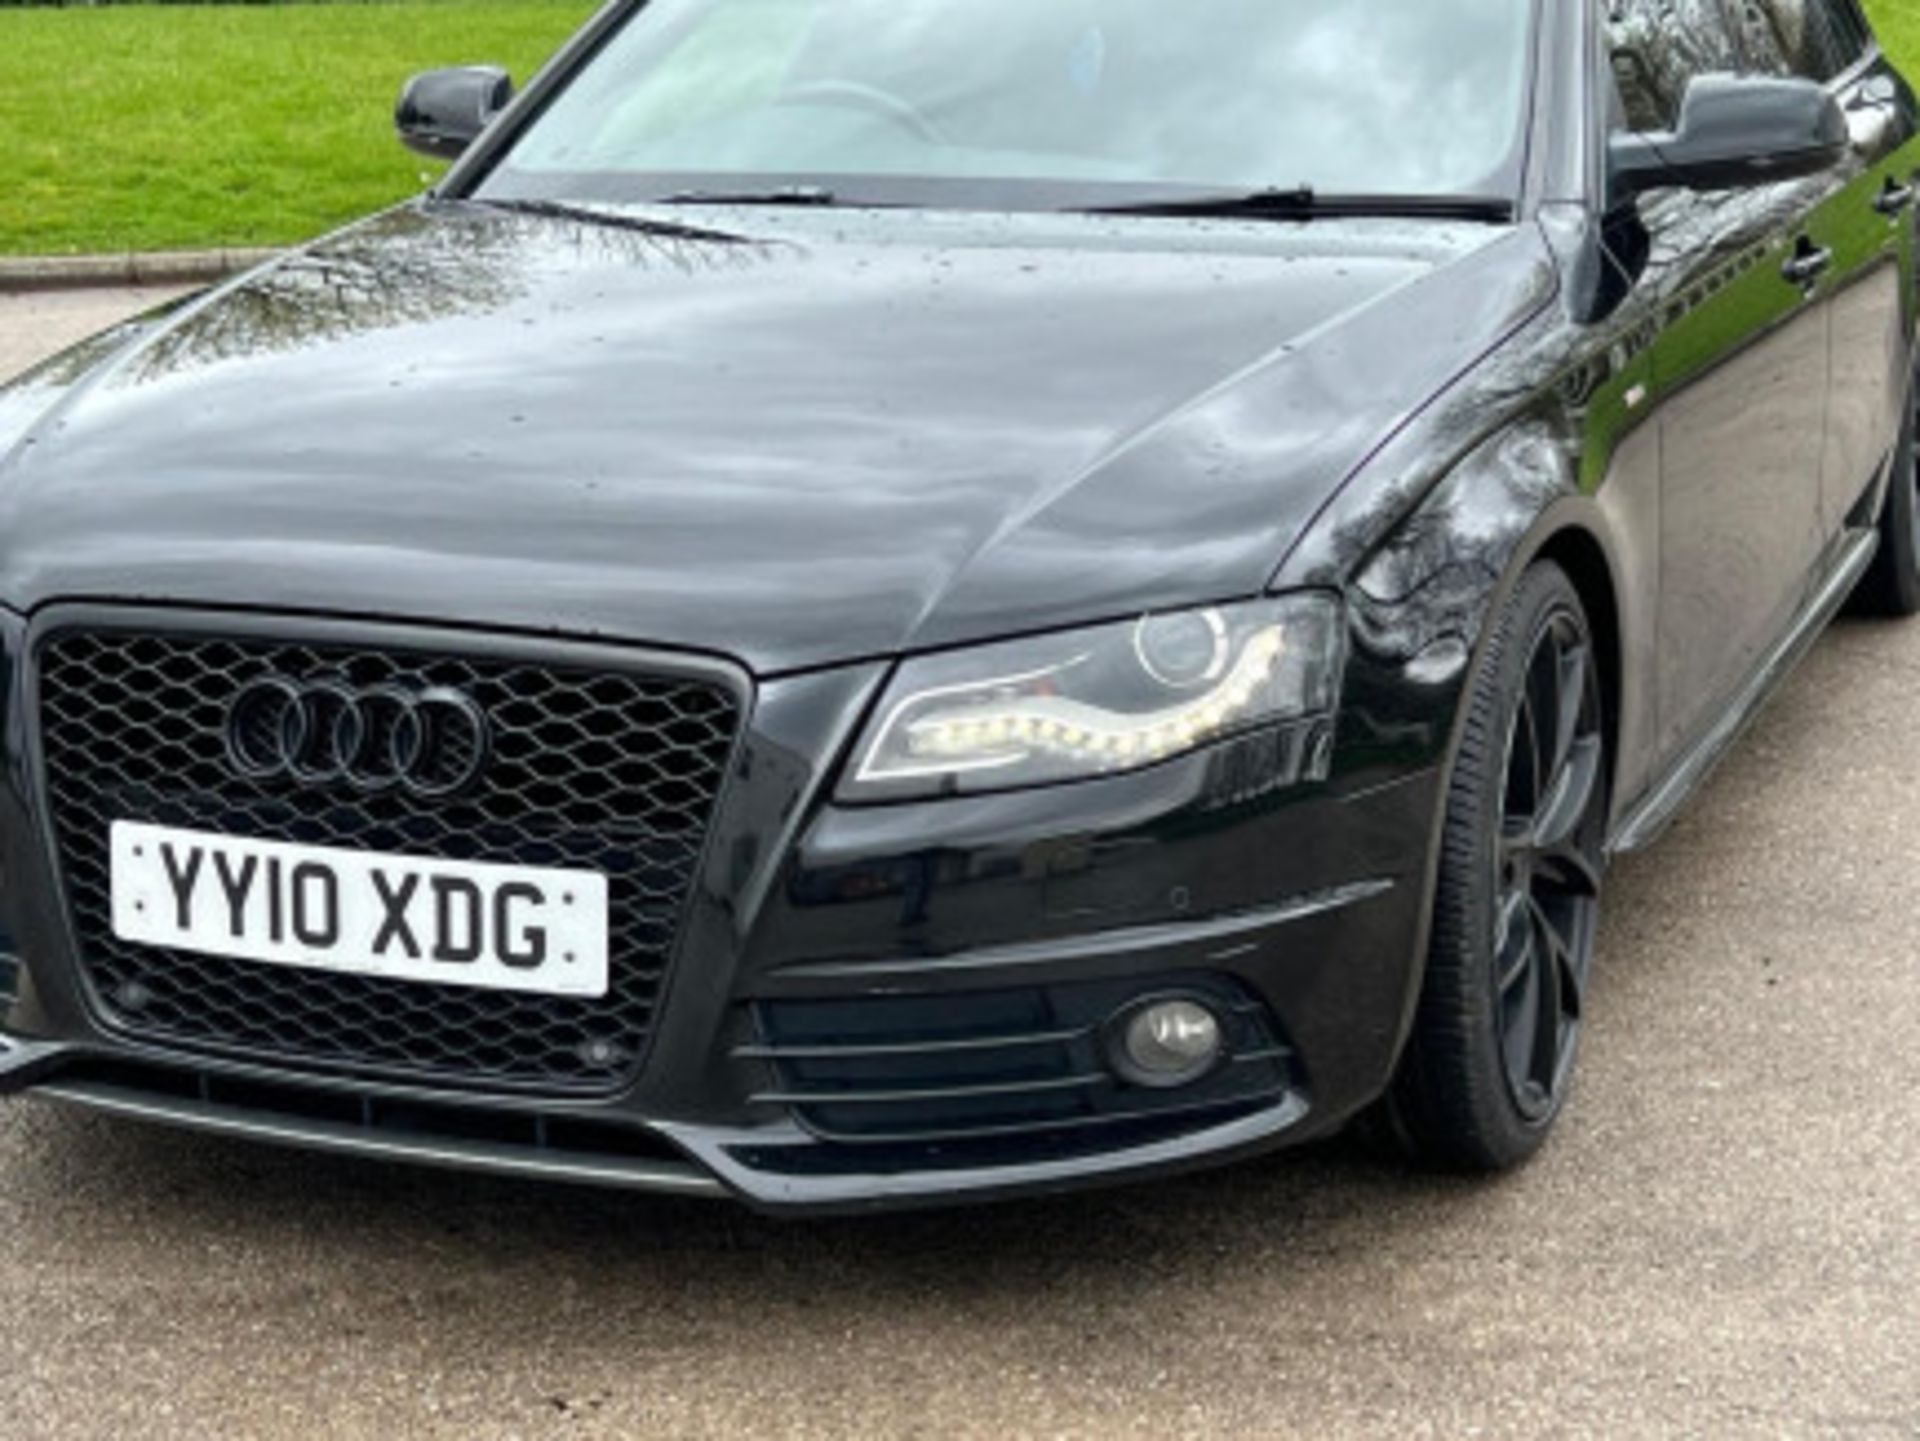 2010 AUDI A4 AVANT 2.0 TFSI S LINE SPECIAL EDITION S TRONIC QUATTRO >>--NO VAT ON HAMMER--<< - Image 39 of 115